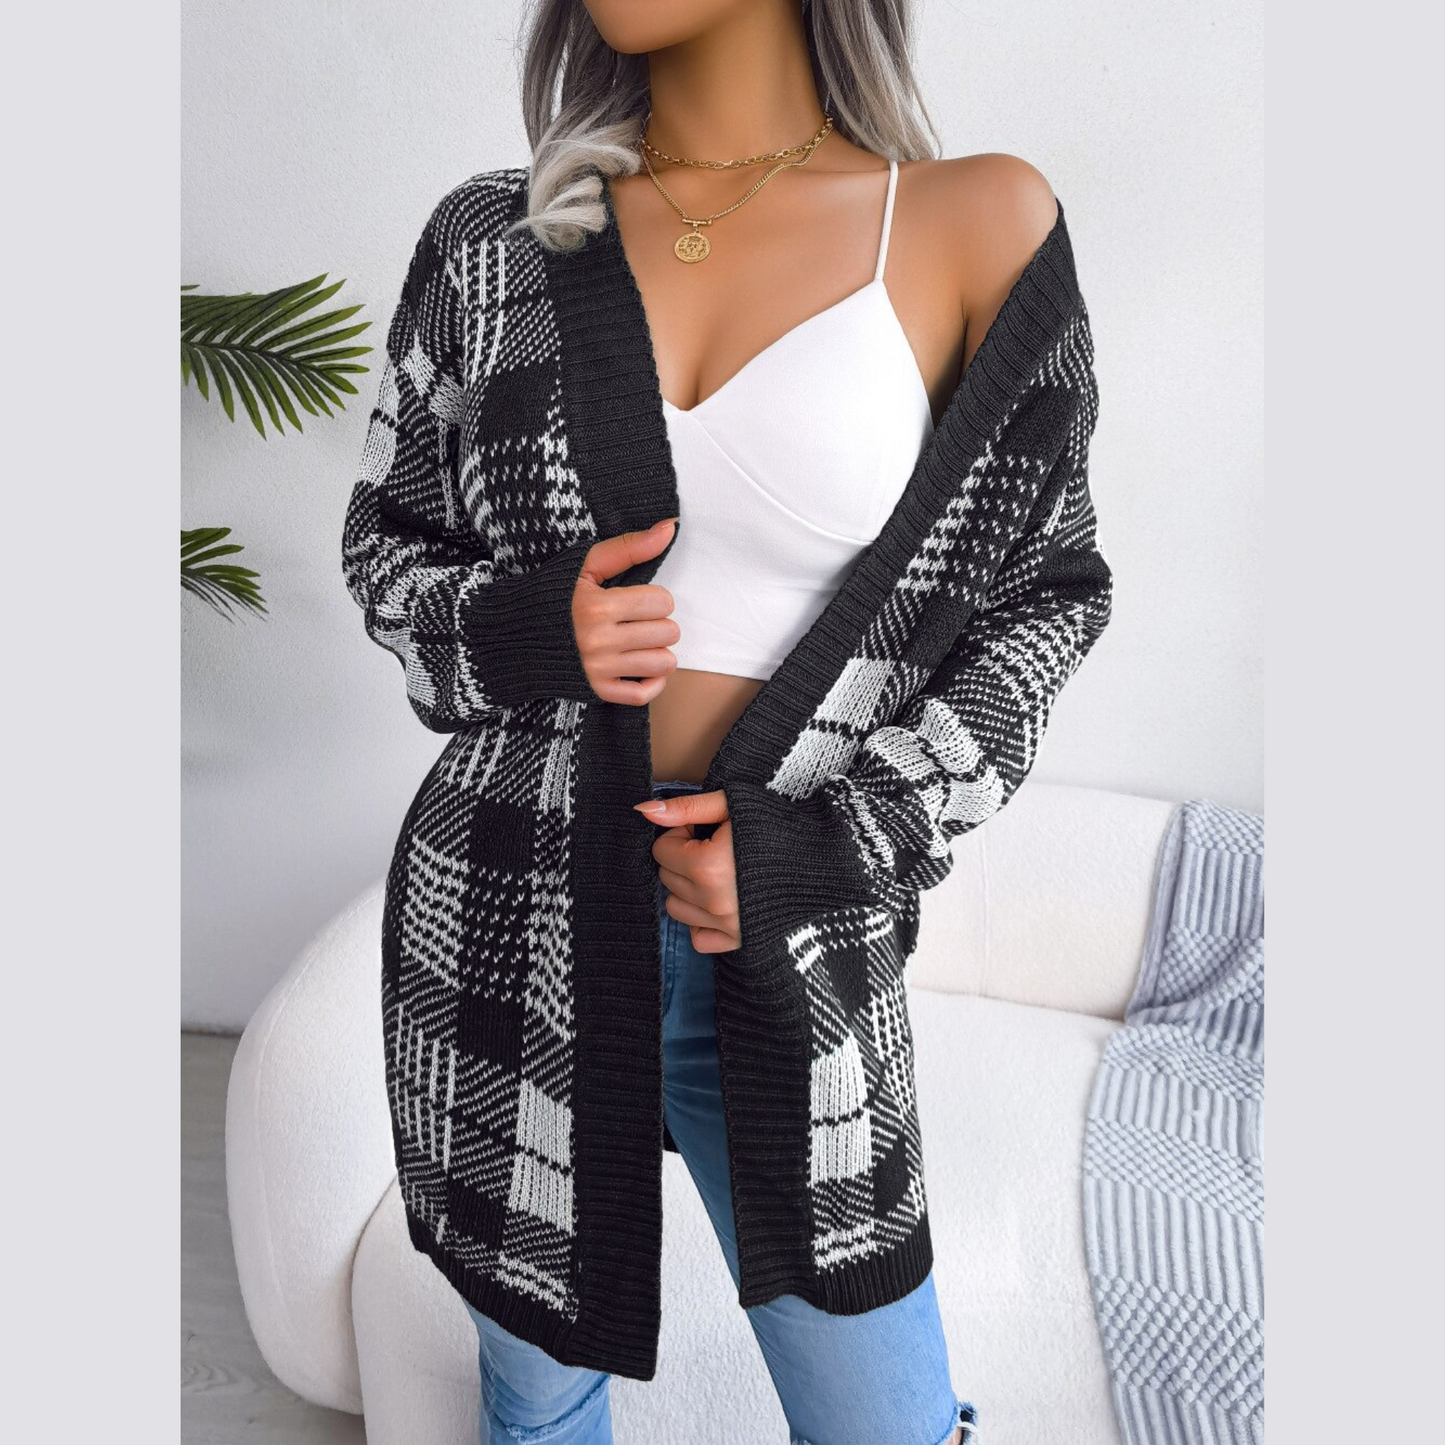 Lana - Black Knitted Plaid Belted Cardigan